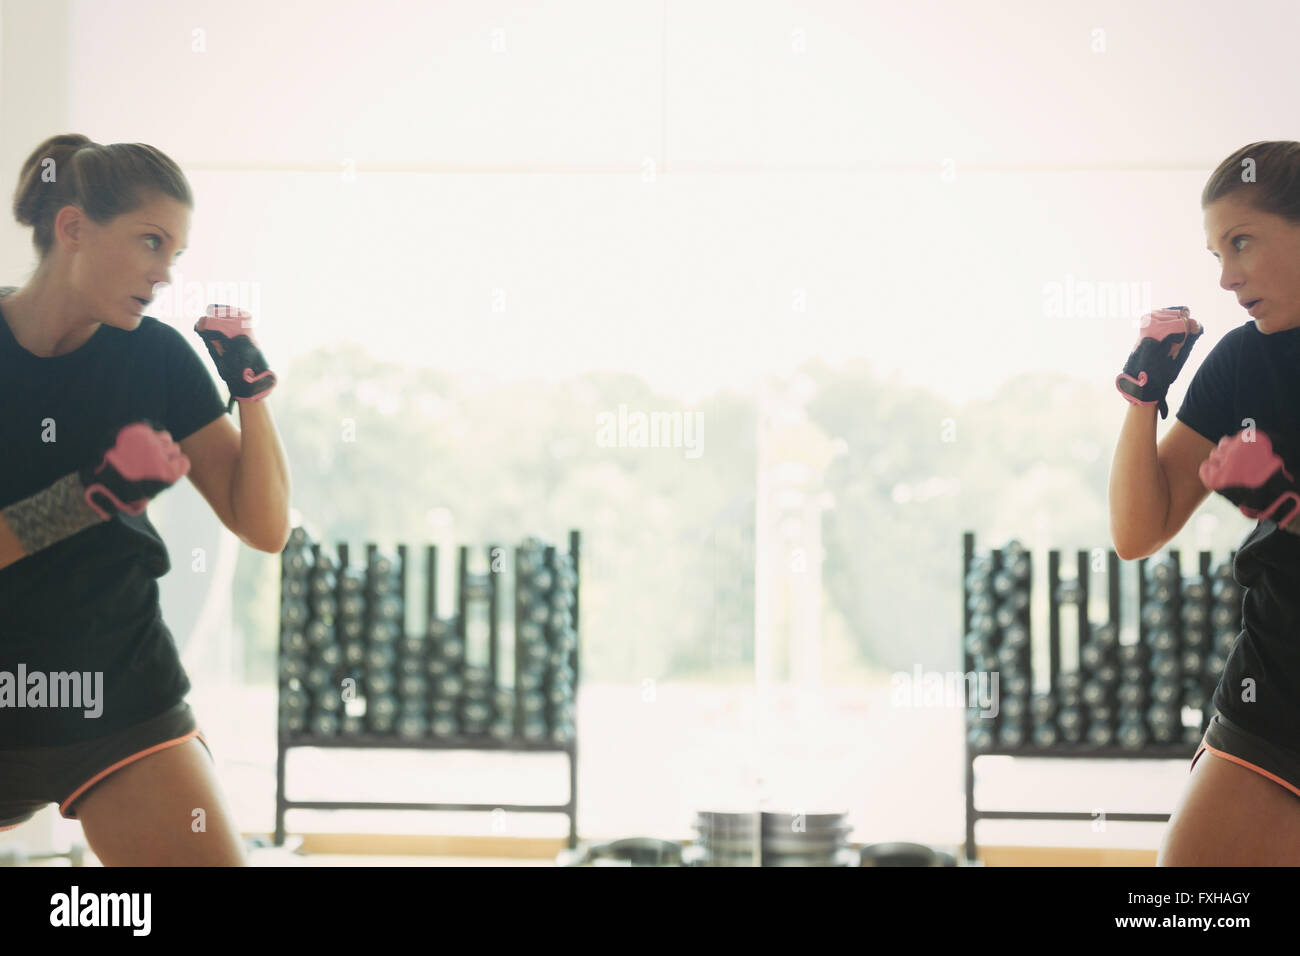 Reflection of woman shadow boxing at gym studio mirror Stock Photo